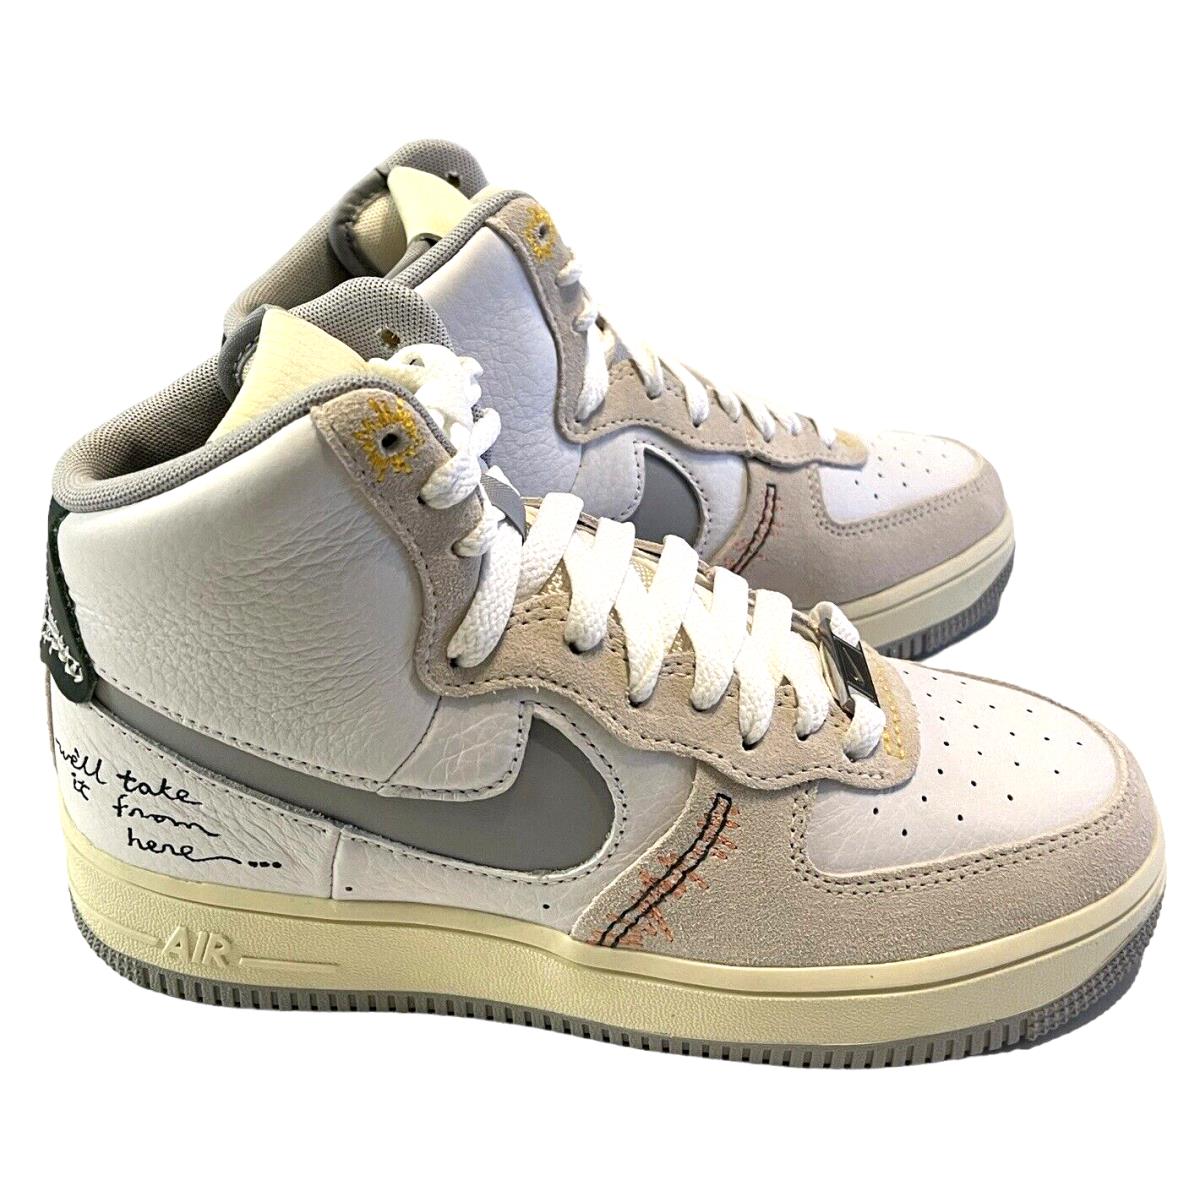 Nike Air Force 1 High Basketball Shoes Women s We`ll Take It From Here Size 5.5